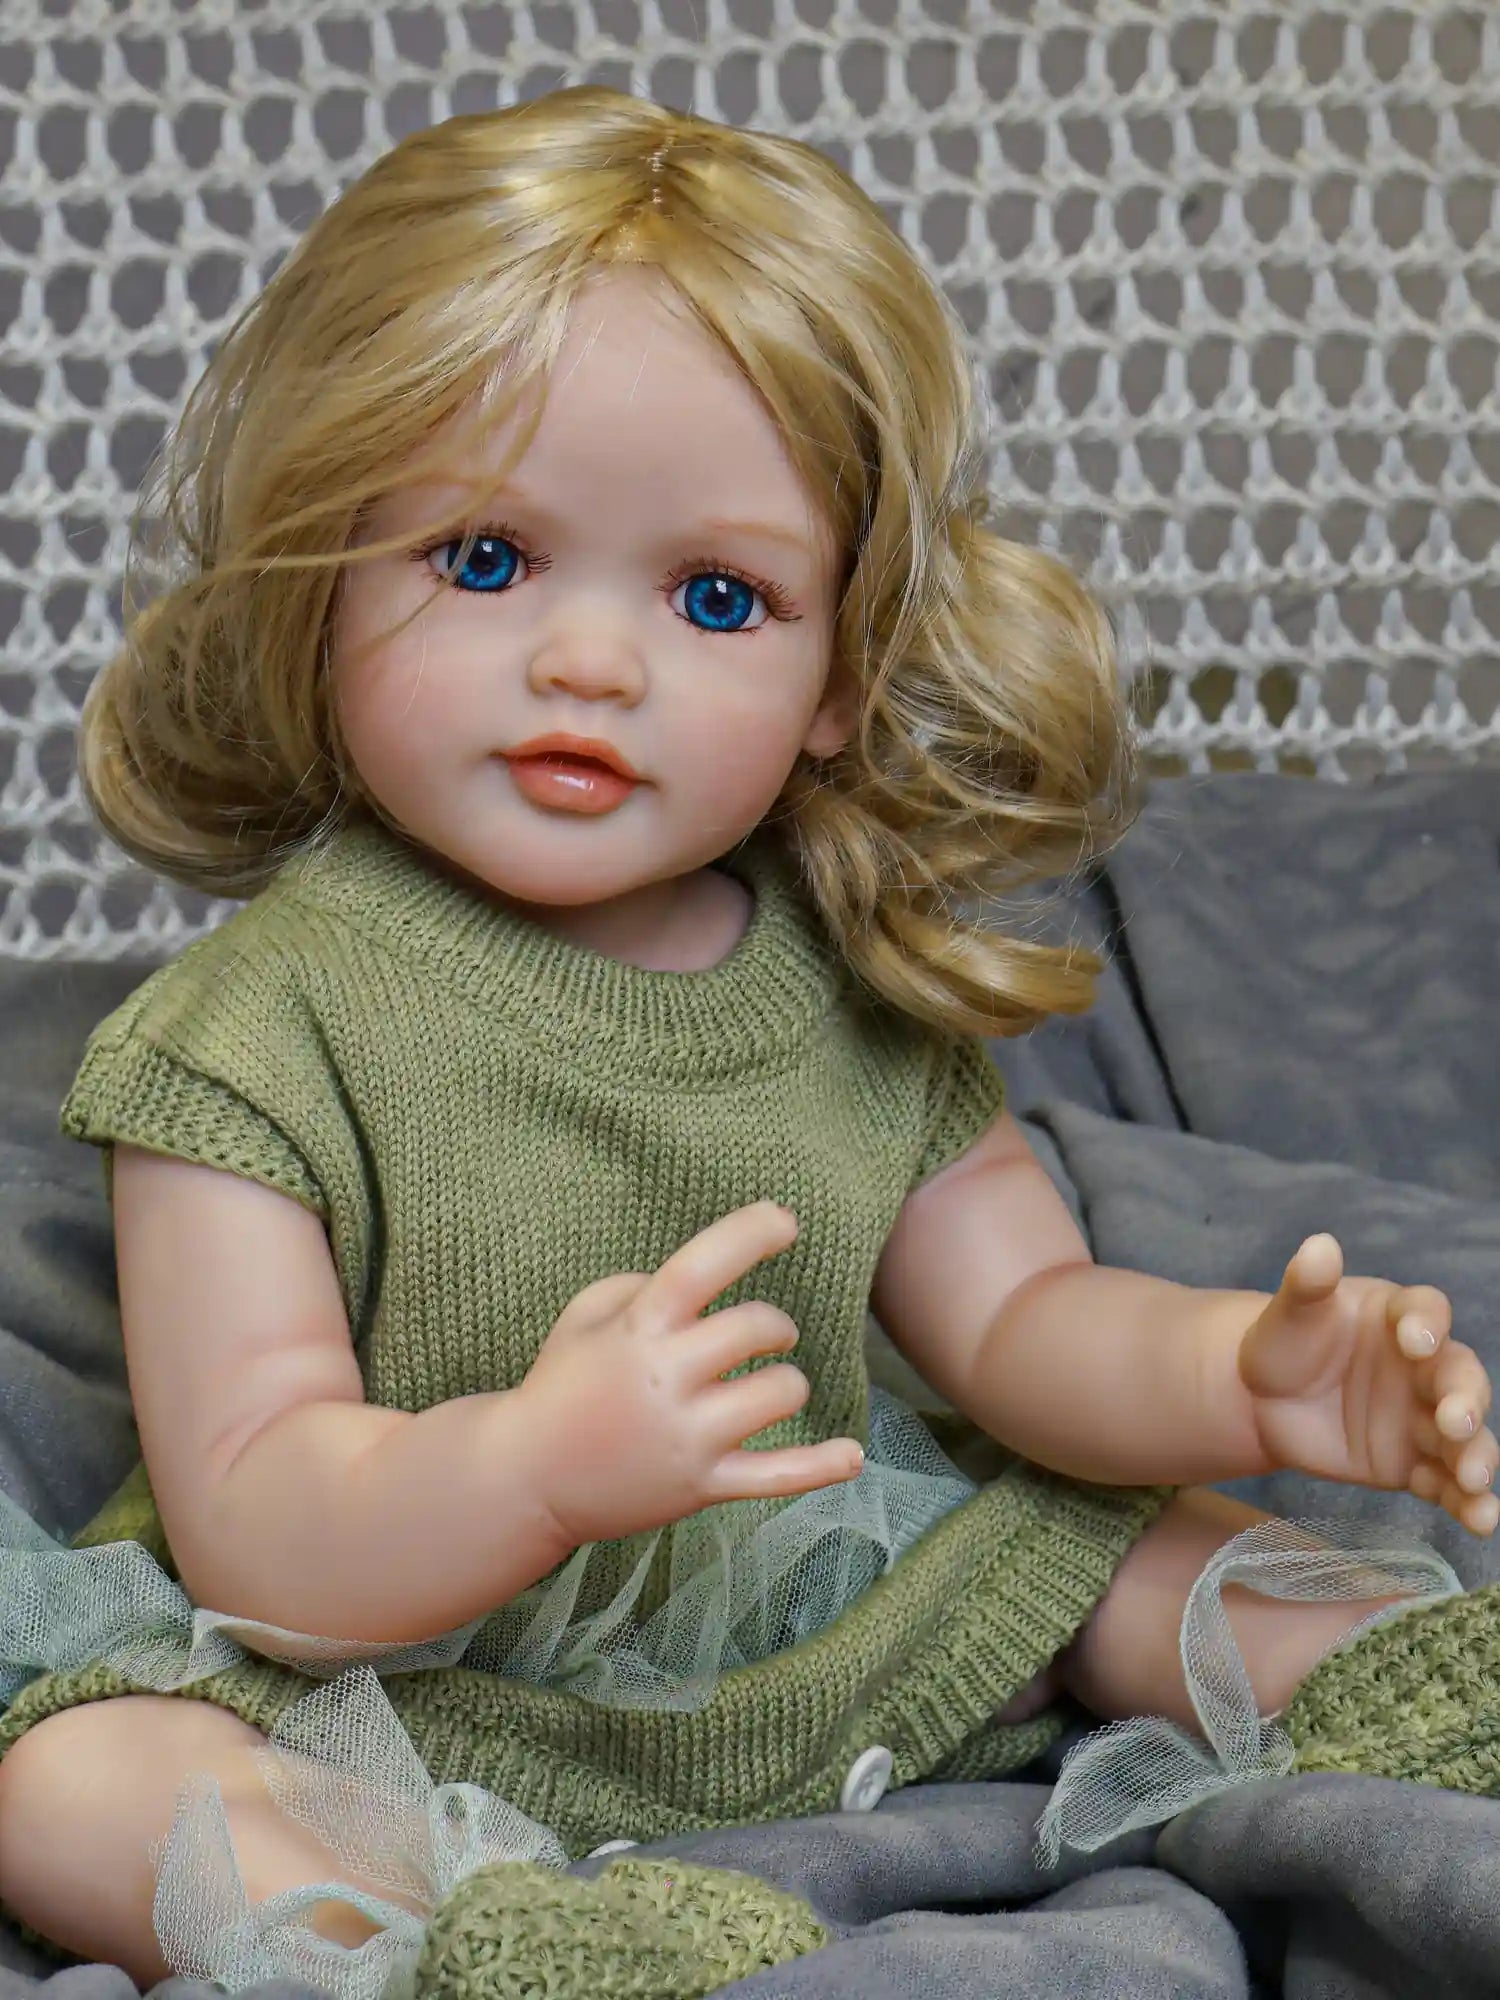 Artisanal doll with the appearance of a young child, featuring blonde curls, sky-blue eyes, and a green hand-knit dress and shoes.